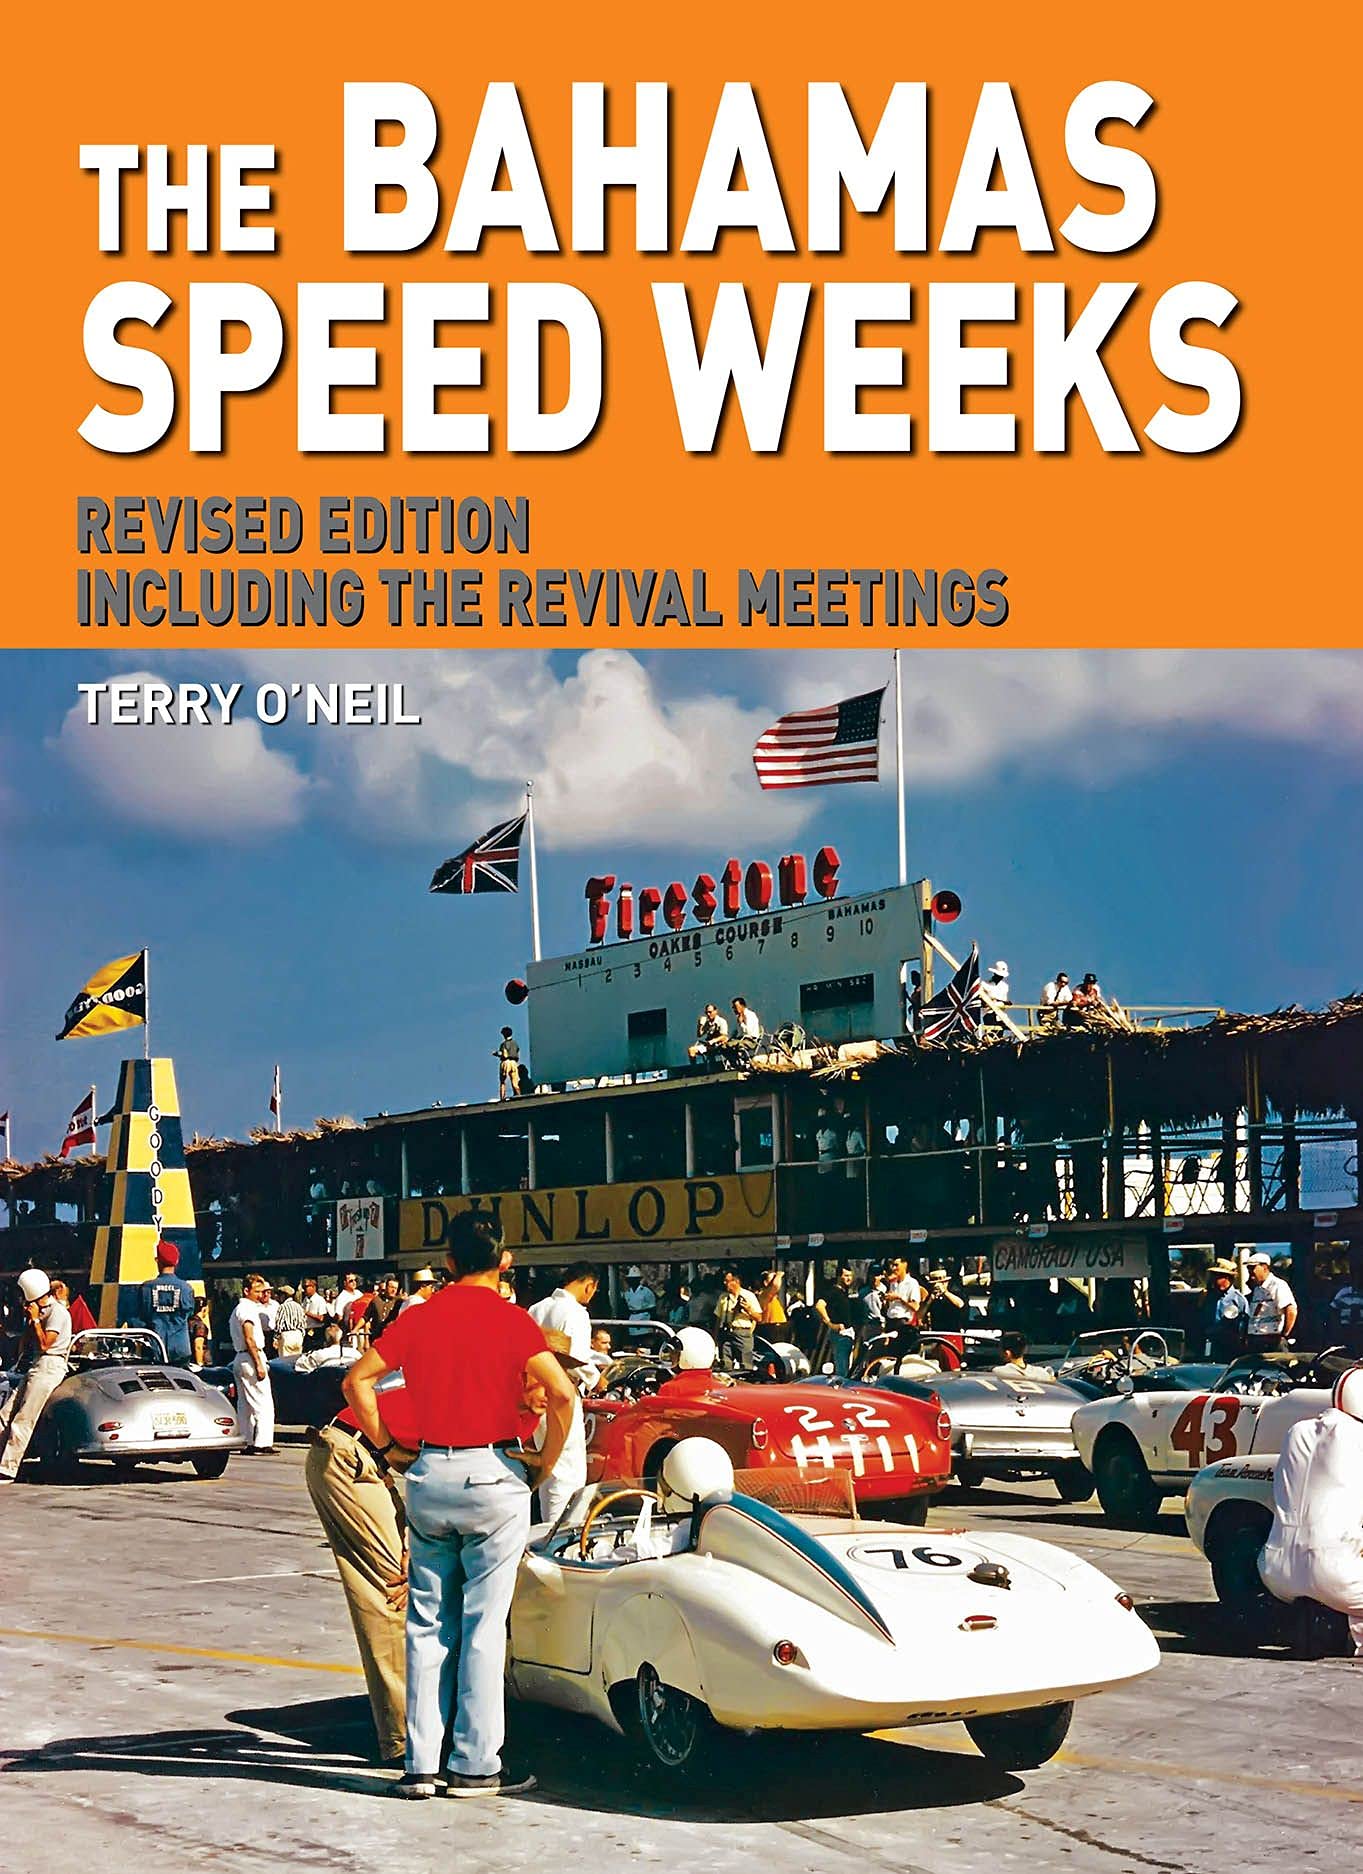 THE BAHAMAS SPEED WEEKS REVISED EDITION INCLUDING THE REVIVAL MEETINGS